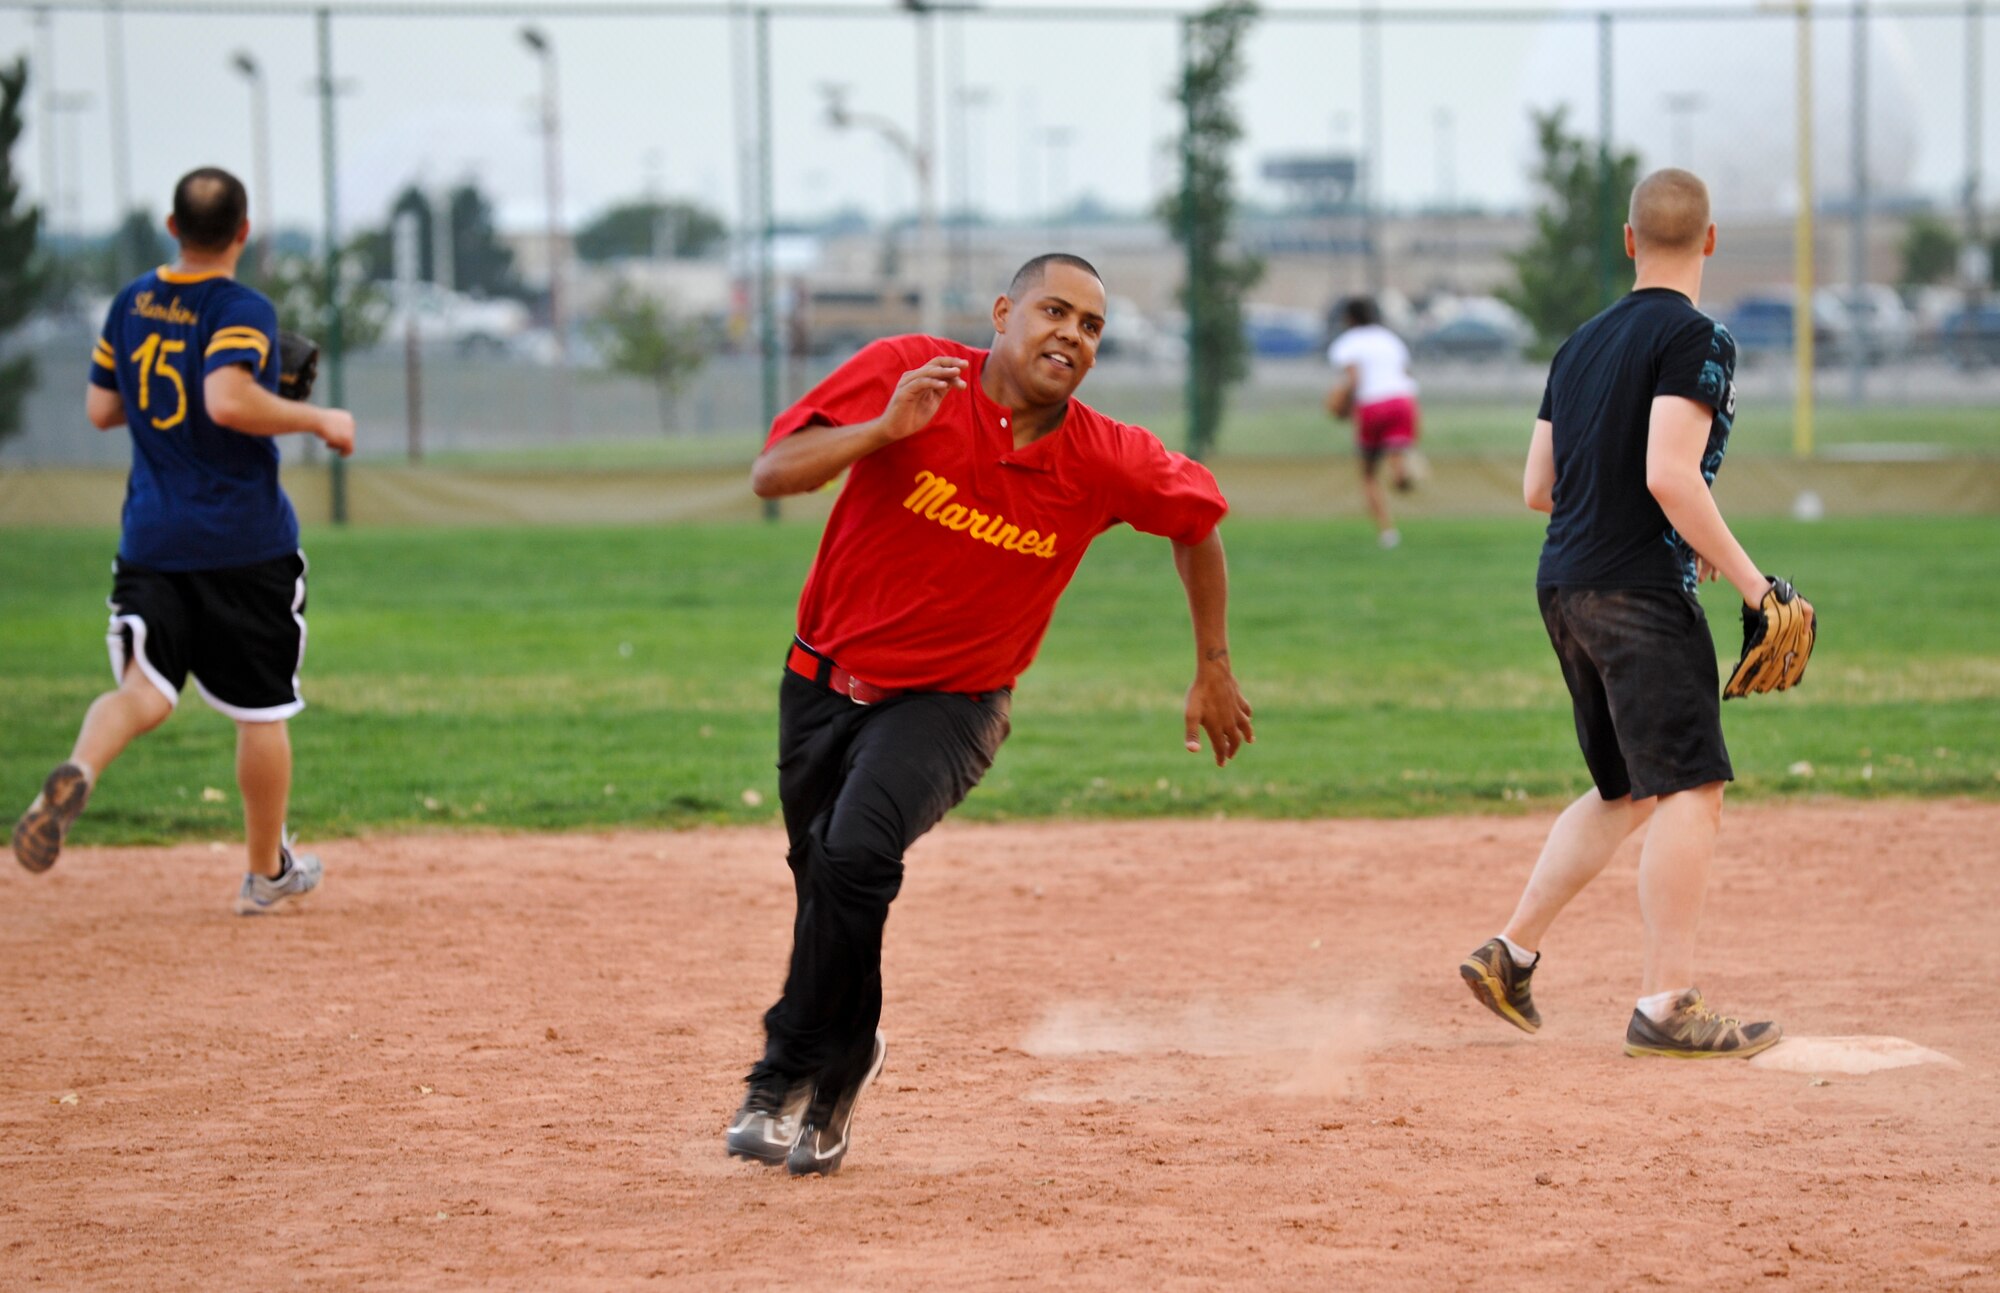 BUCKLEY AIR FORCE BASE, Colo. – P. Dawson rounds second base during a game of intramural softball Aug. 9, 2012. Dawson is a lance corporal assigned to the Marine Air Control Squadron 23. MACS 23 beat the Navy Operational Support Center, Denver with a score of 24-1 and to add to their winning record of 11-1. (U.S. Air Force photo by Senior Airman Christopher Gross)